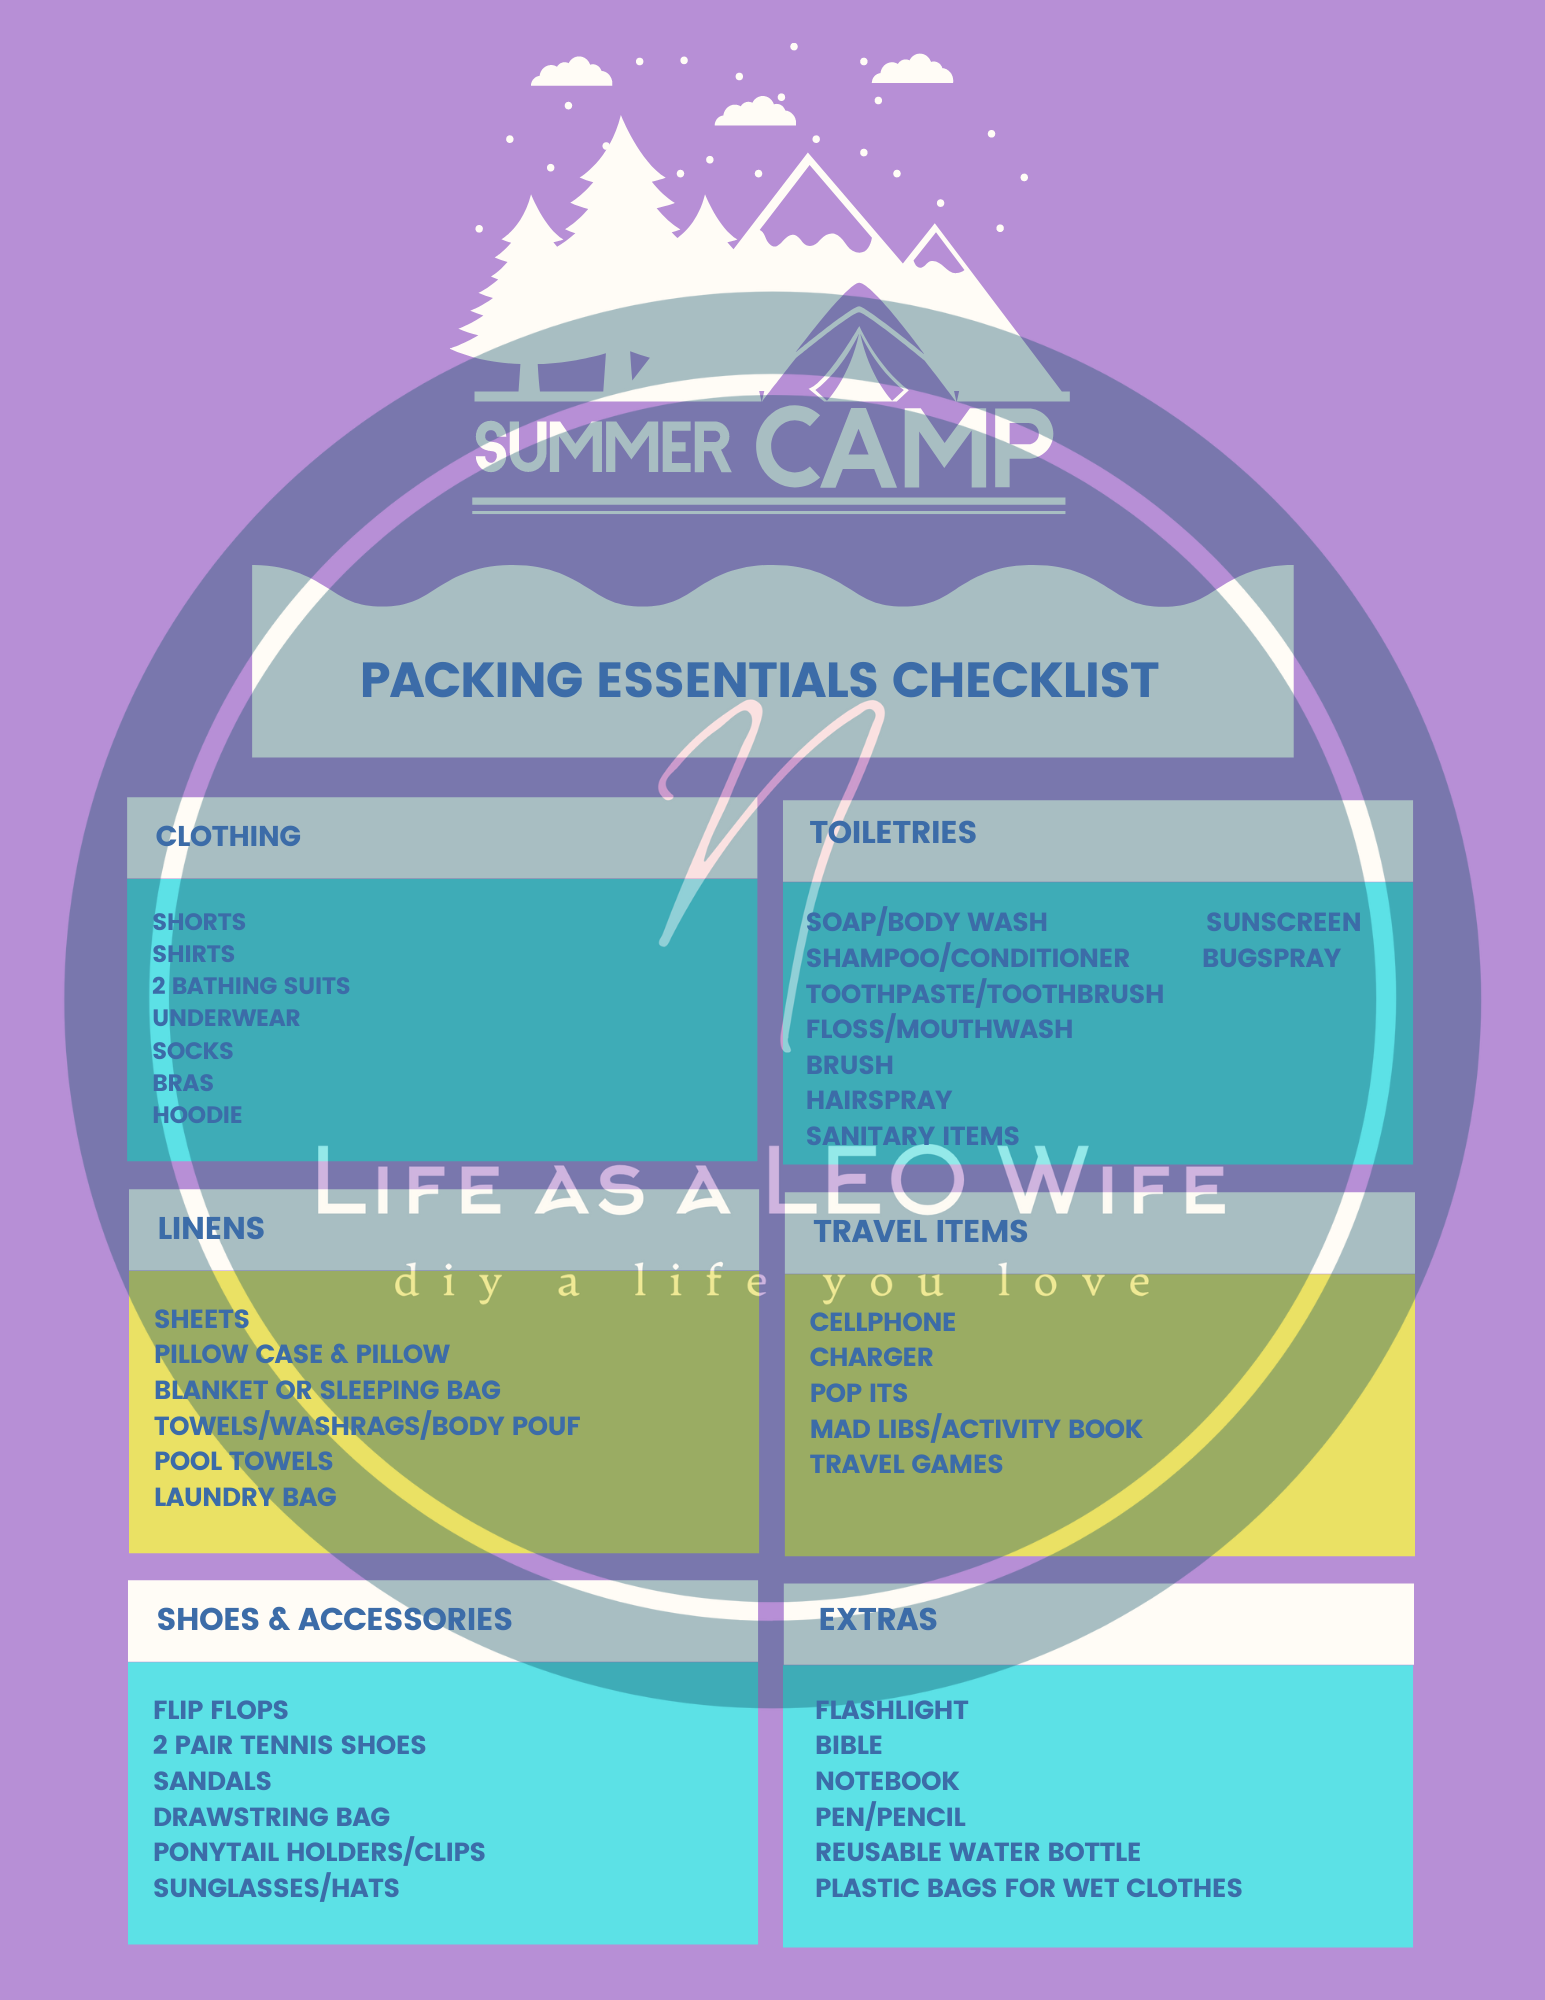 Summer camp checklist for girls with logo overlay